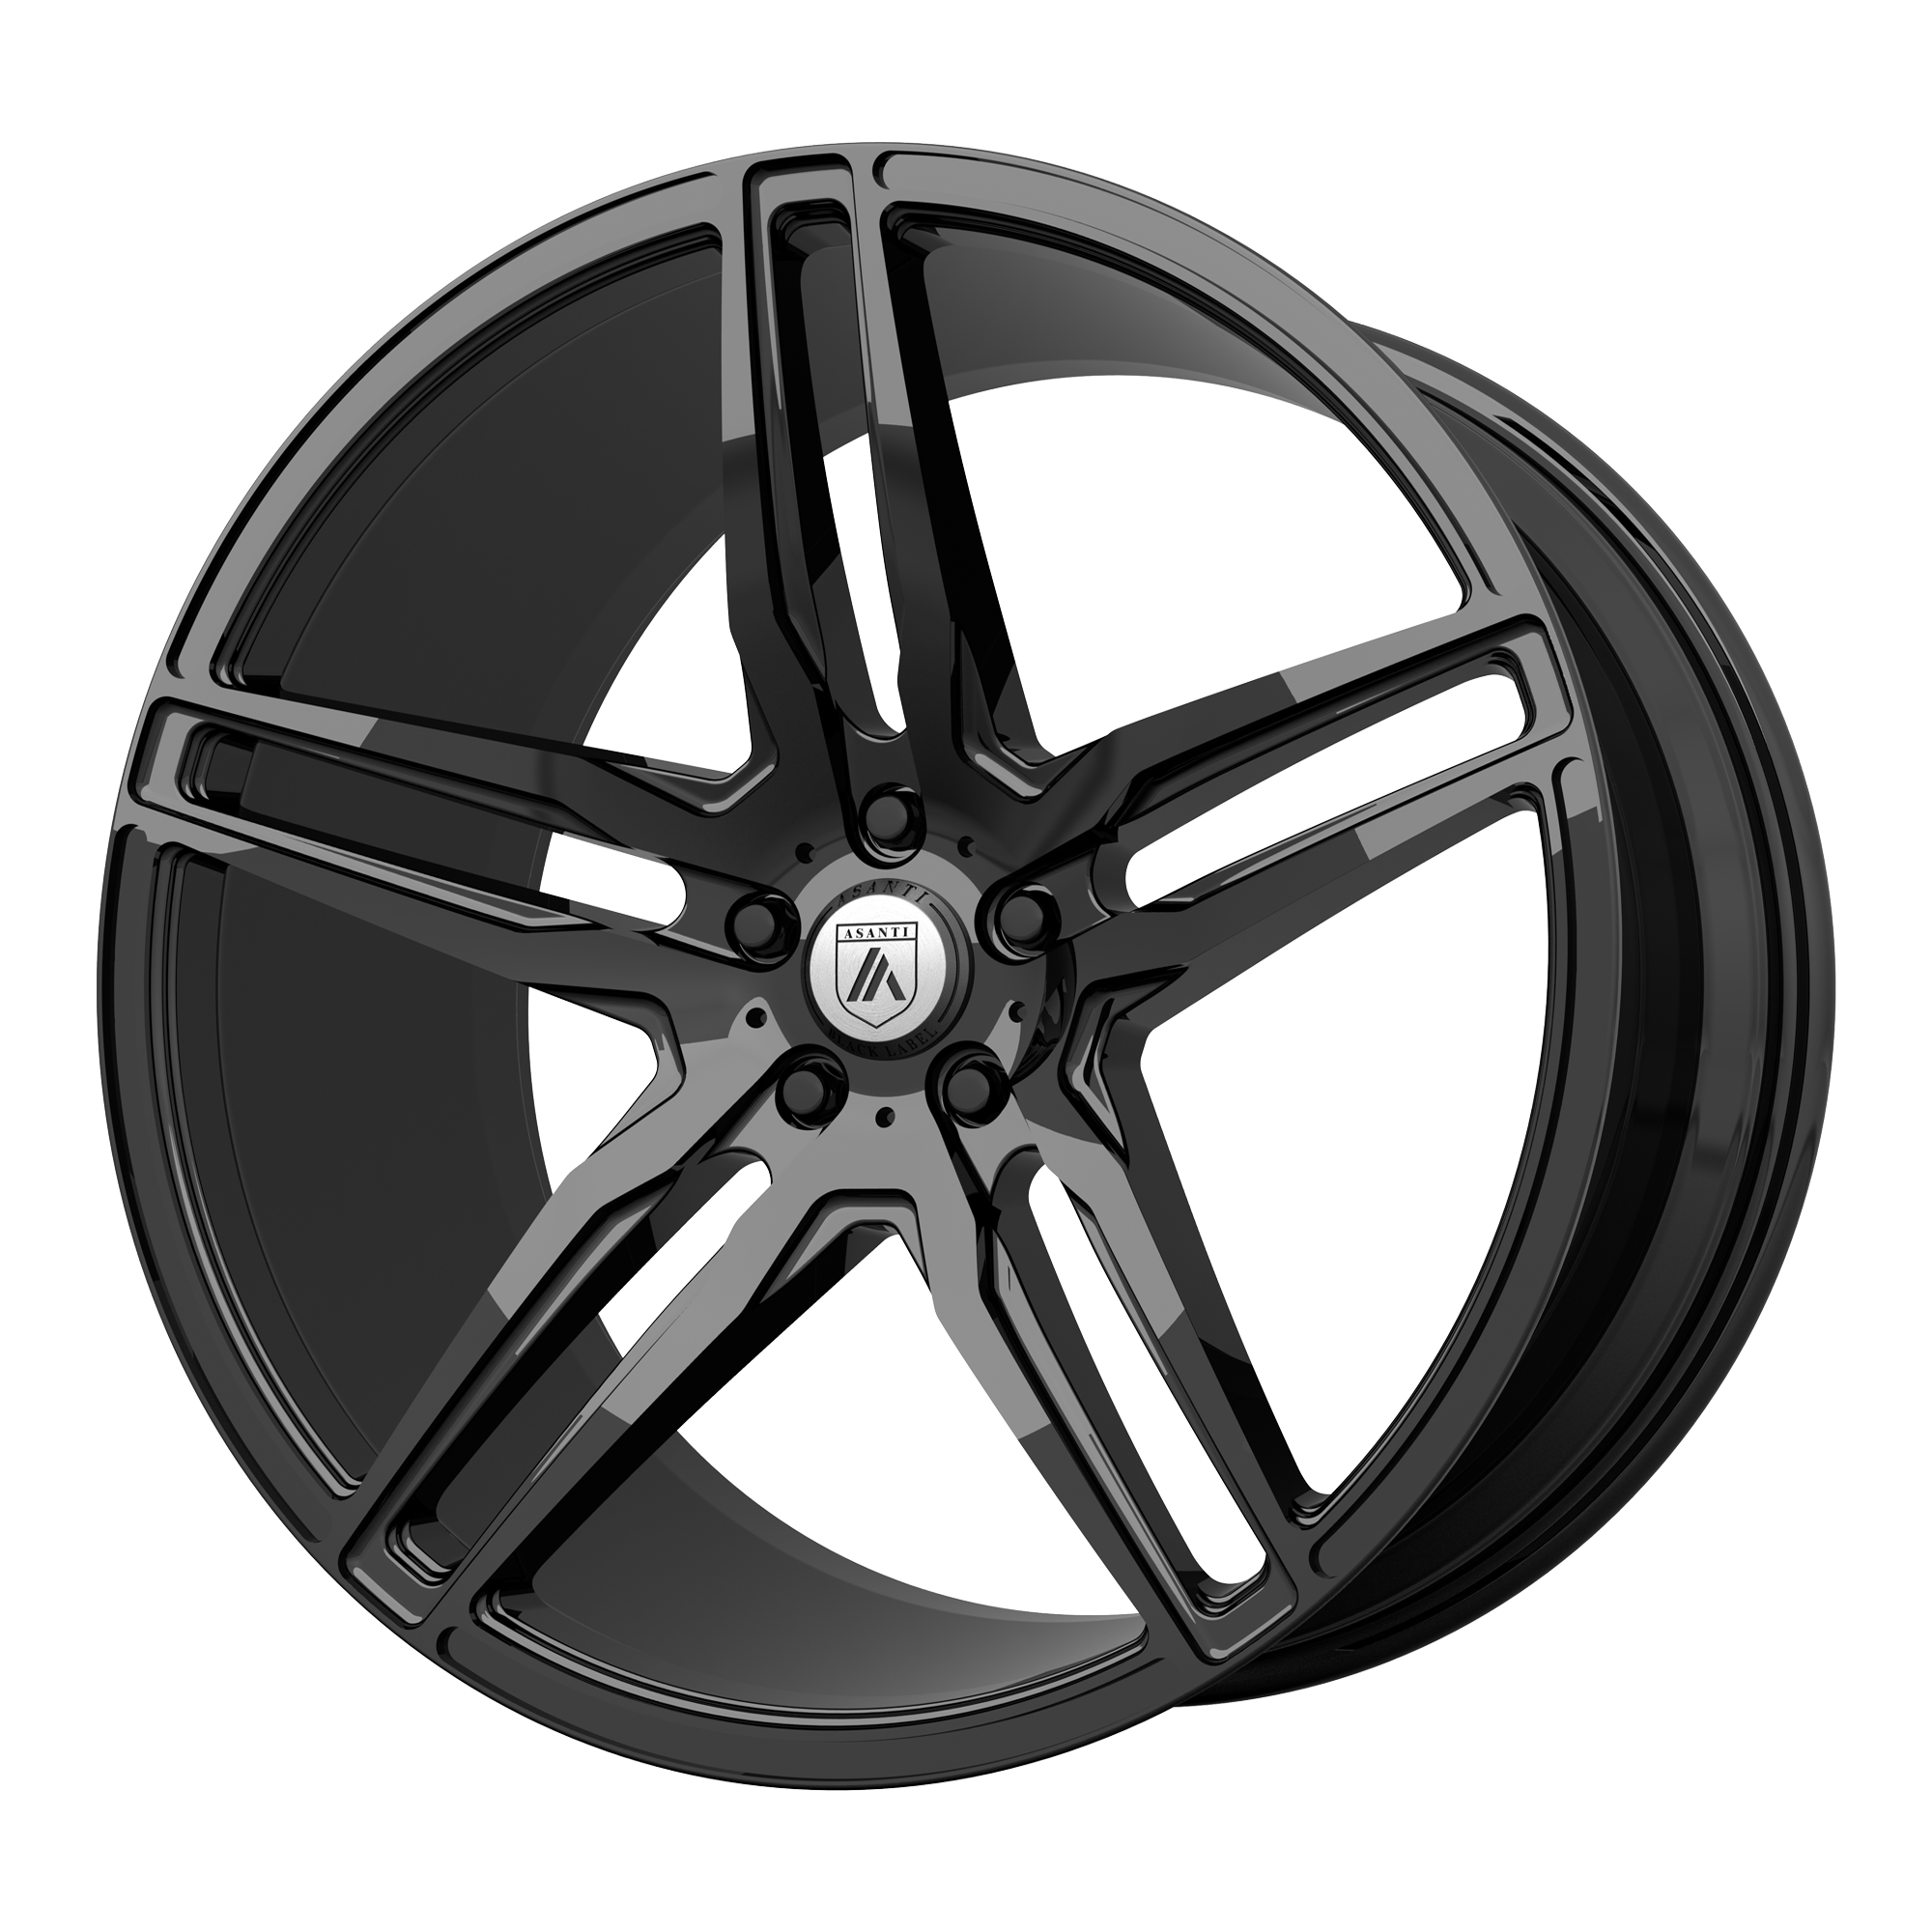 ORION 20x10.5 Blank GLOSS BLACK (38.00 - 45.00 mm) - Tires and Engine Performance